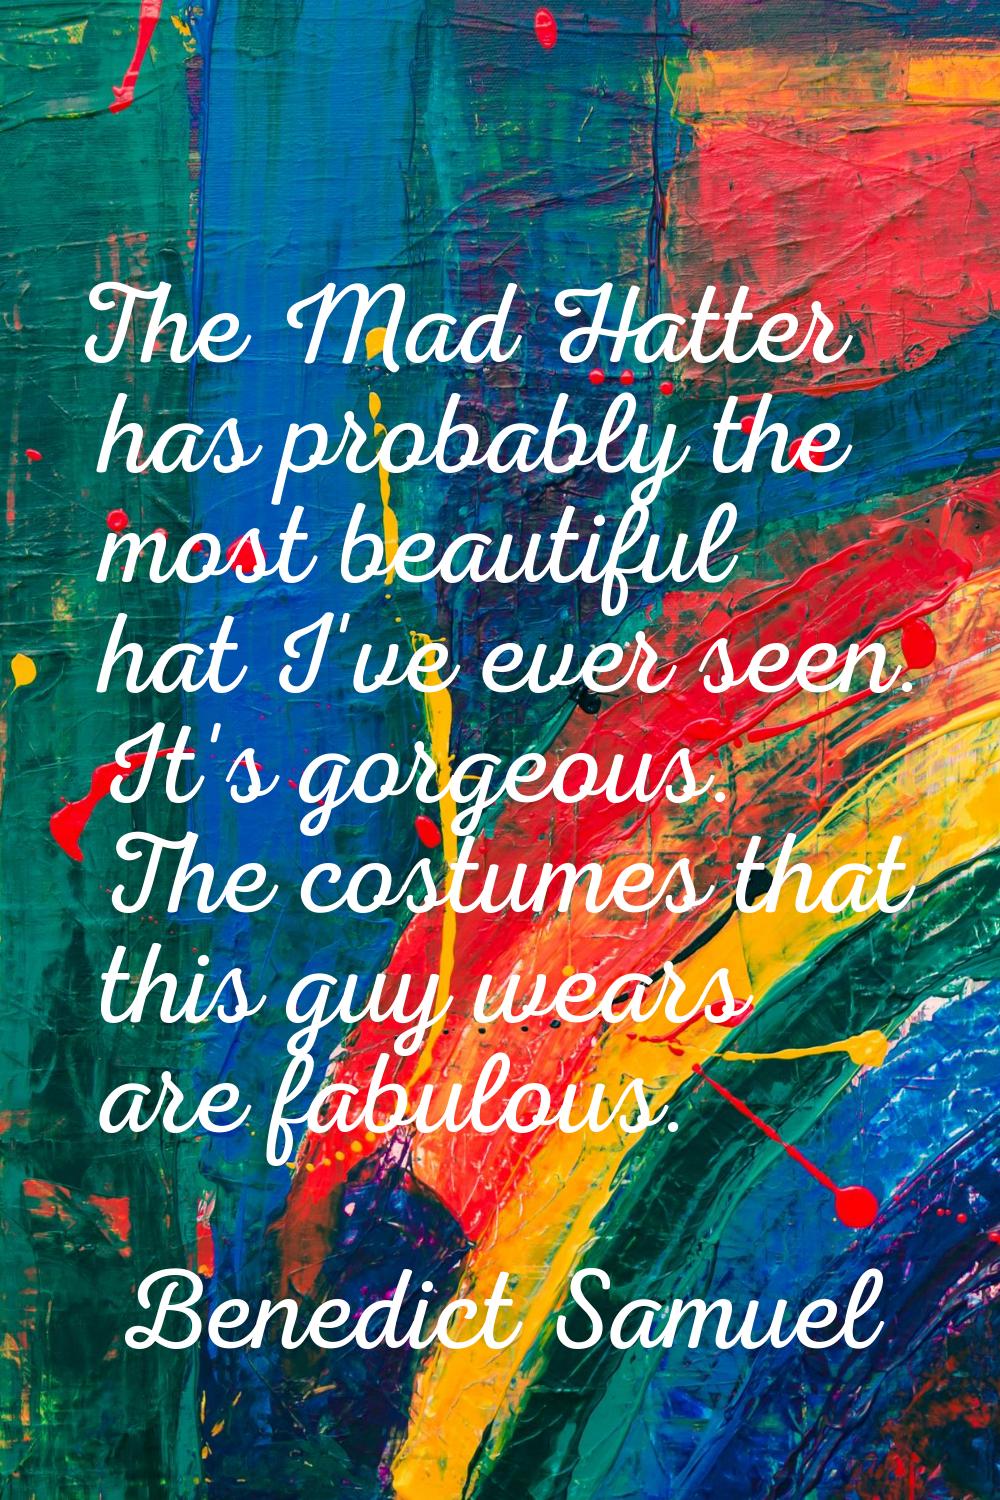 The Mad Hatter has probably the most beautiful hat I've ever seen. It's gorgeous. The costumes that